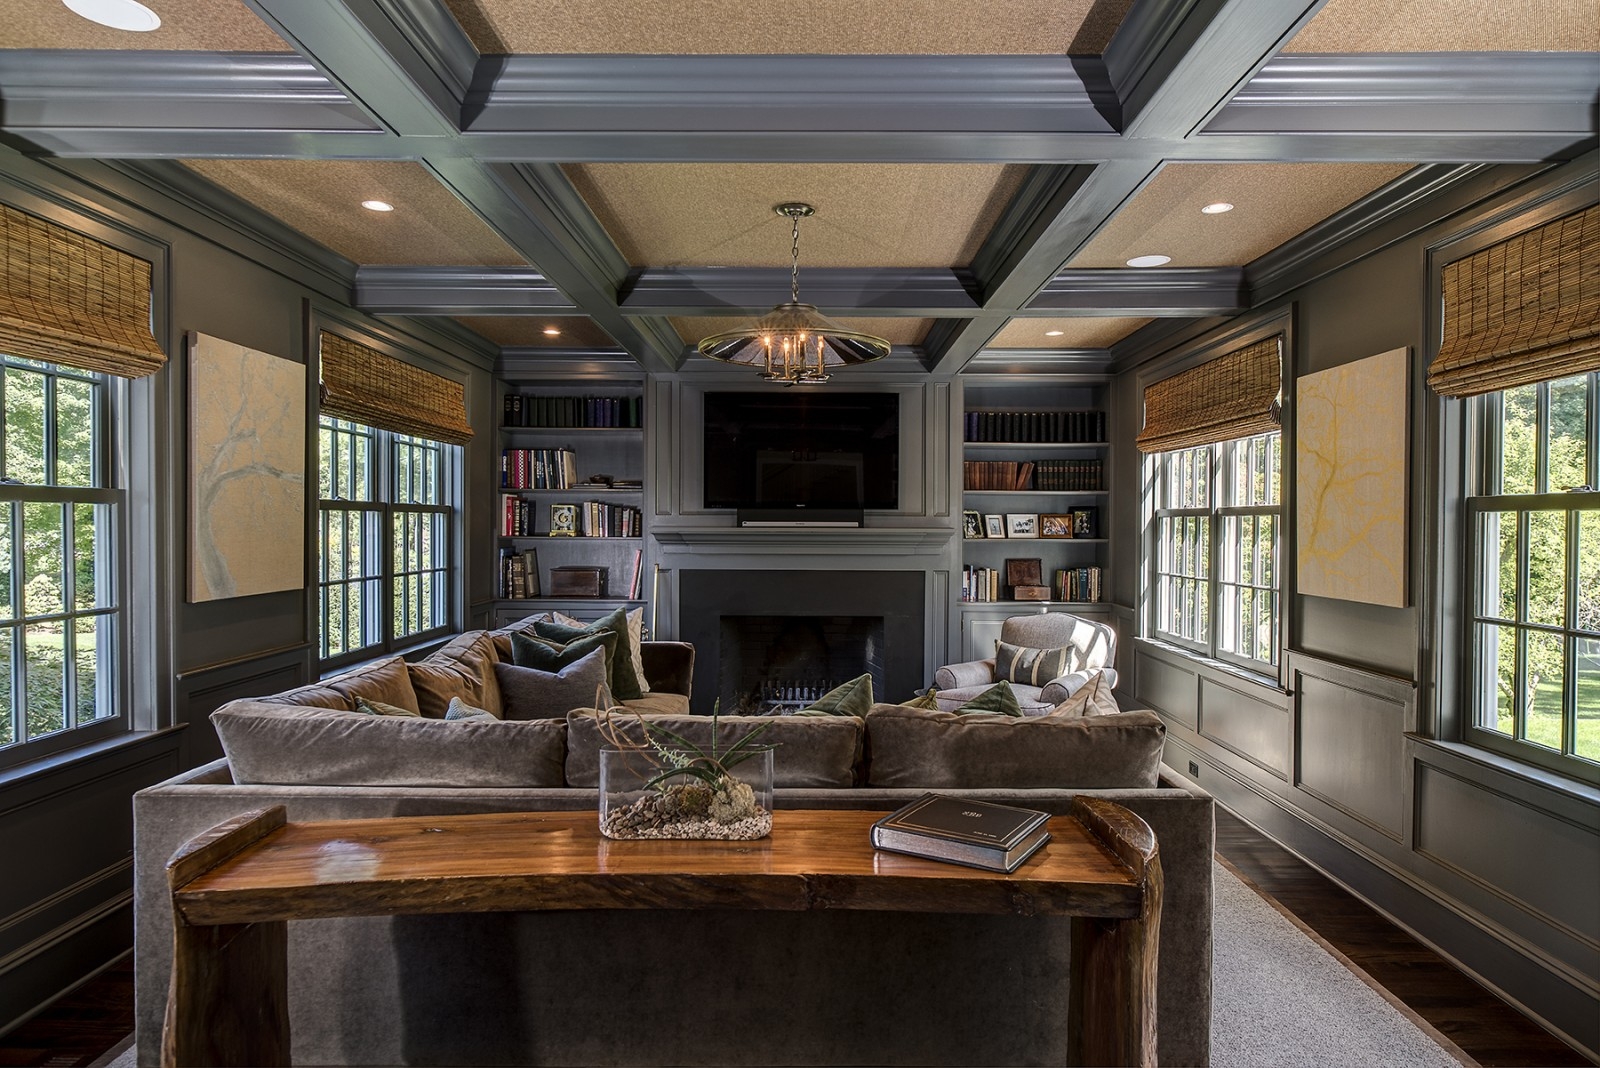 Lighted Coffered Ceilings